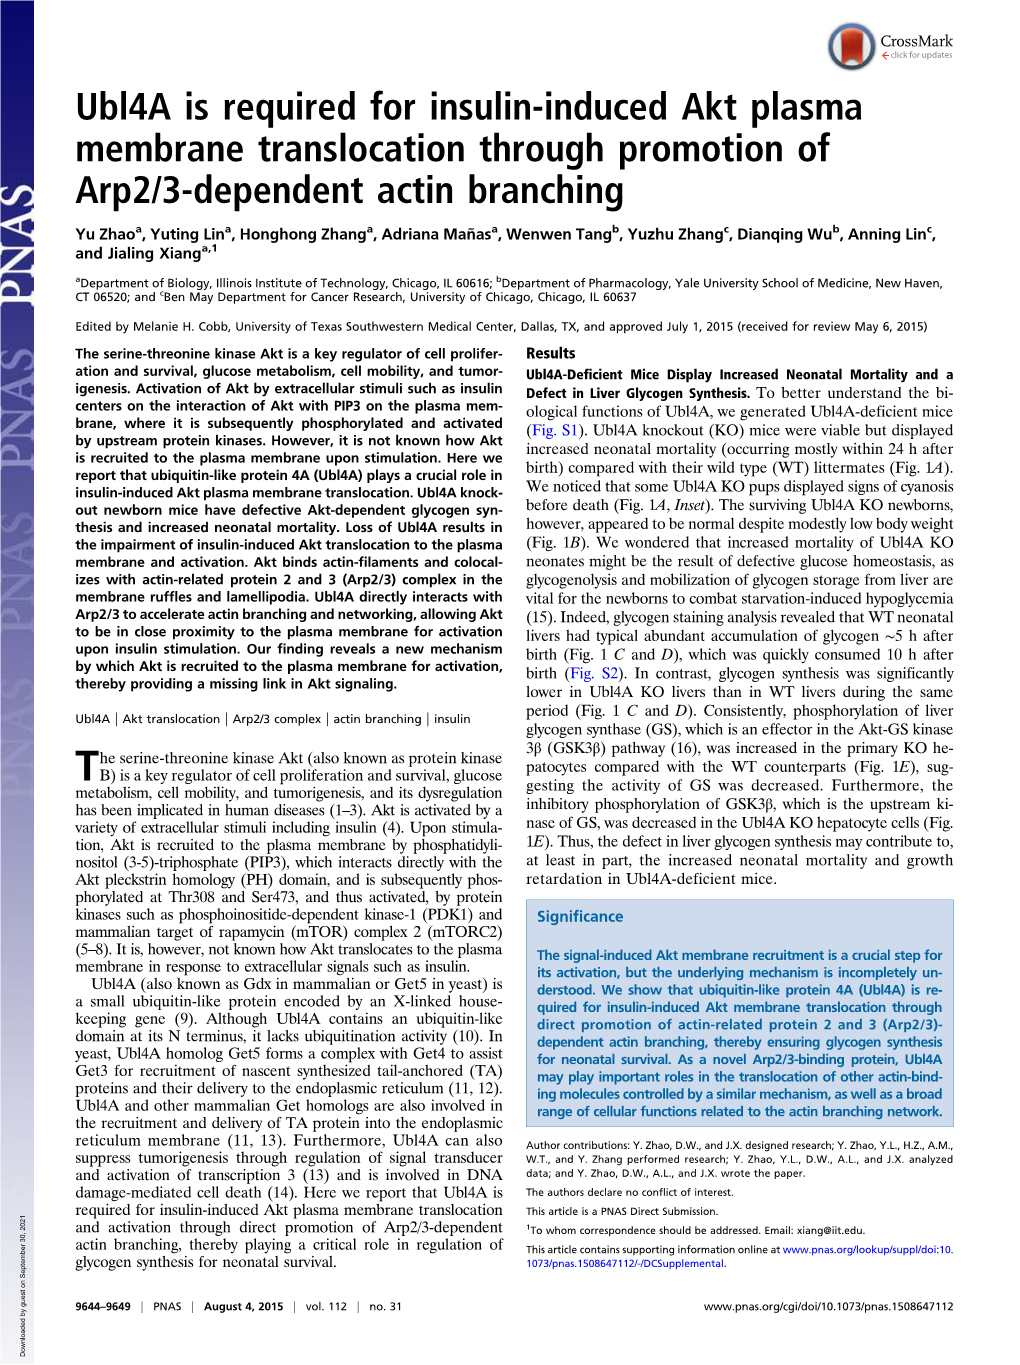 Ubl4a Is Required for Insulin-Induced Akt Plasma Membrane Translocation Through Promotion of Arp2/3-Dependent Actin Branching